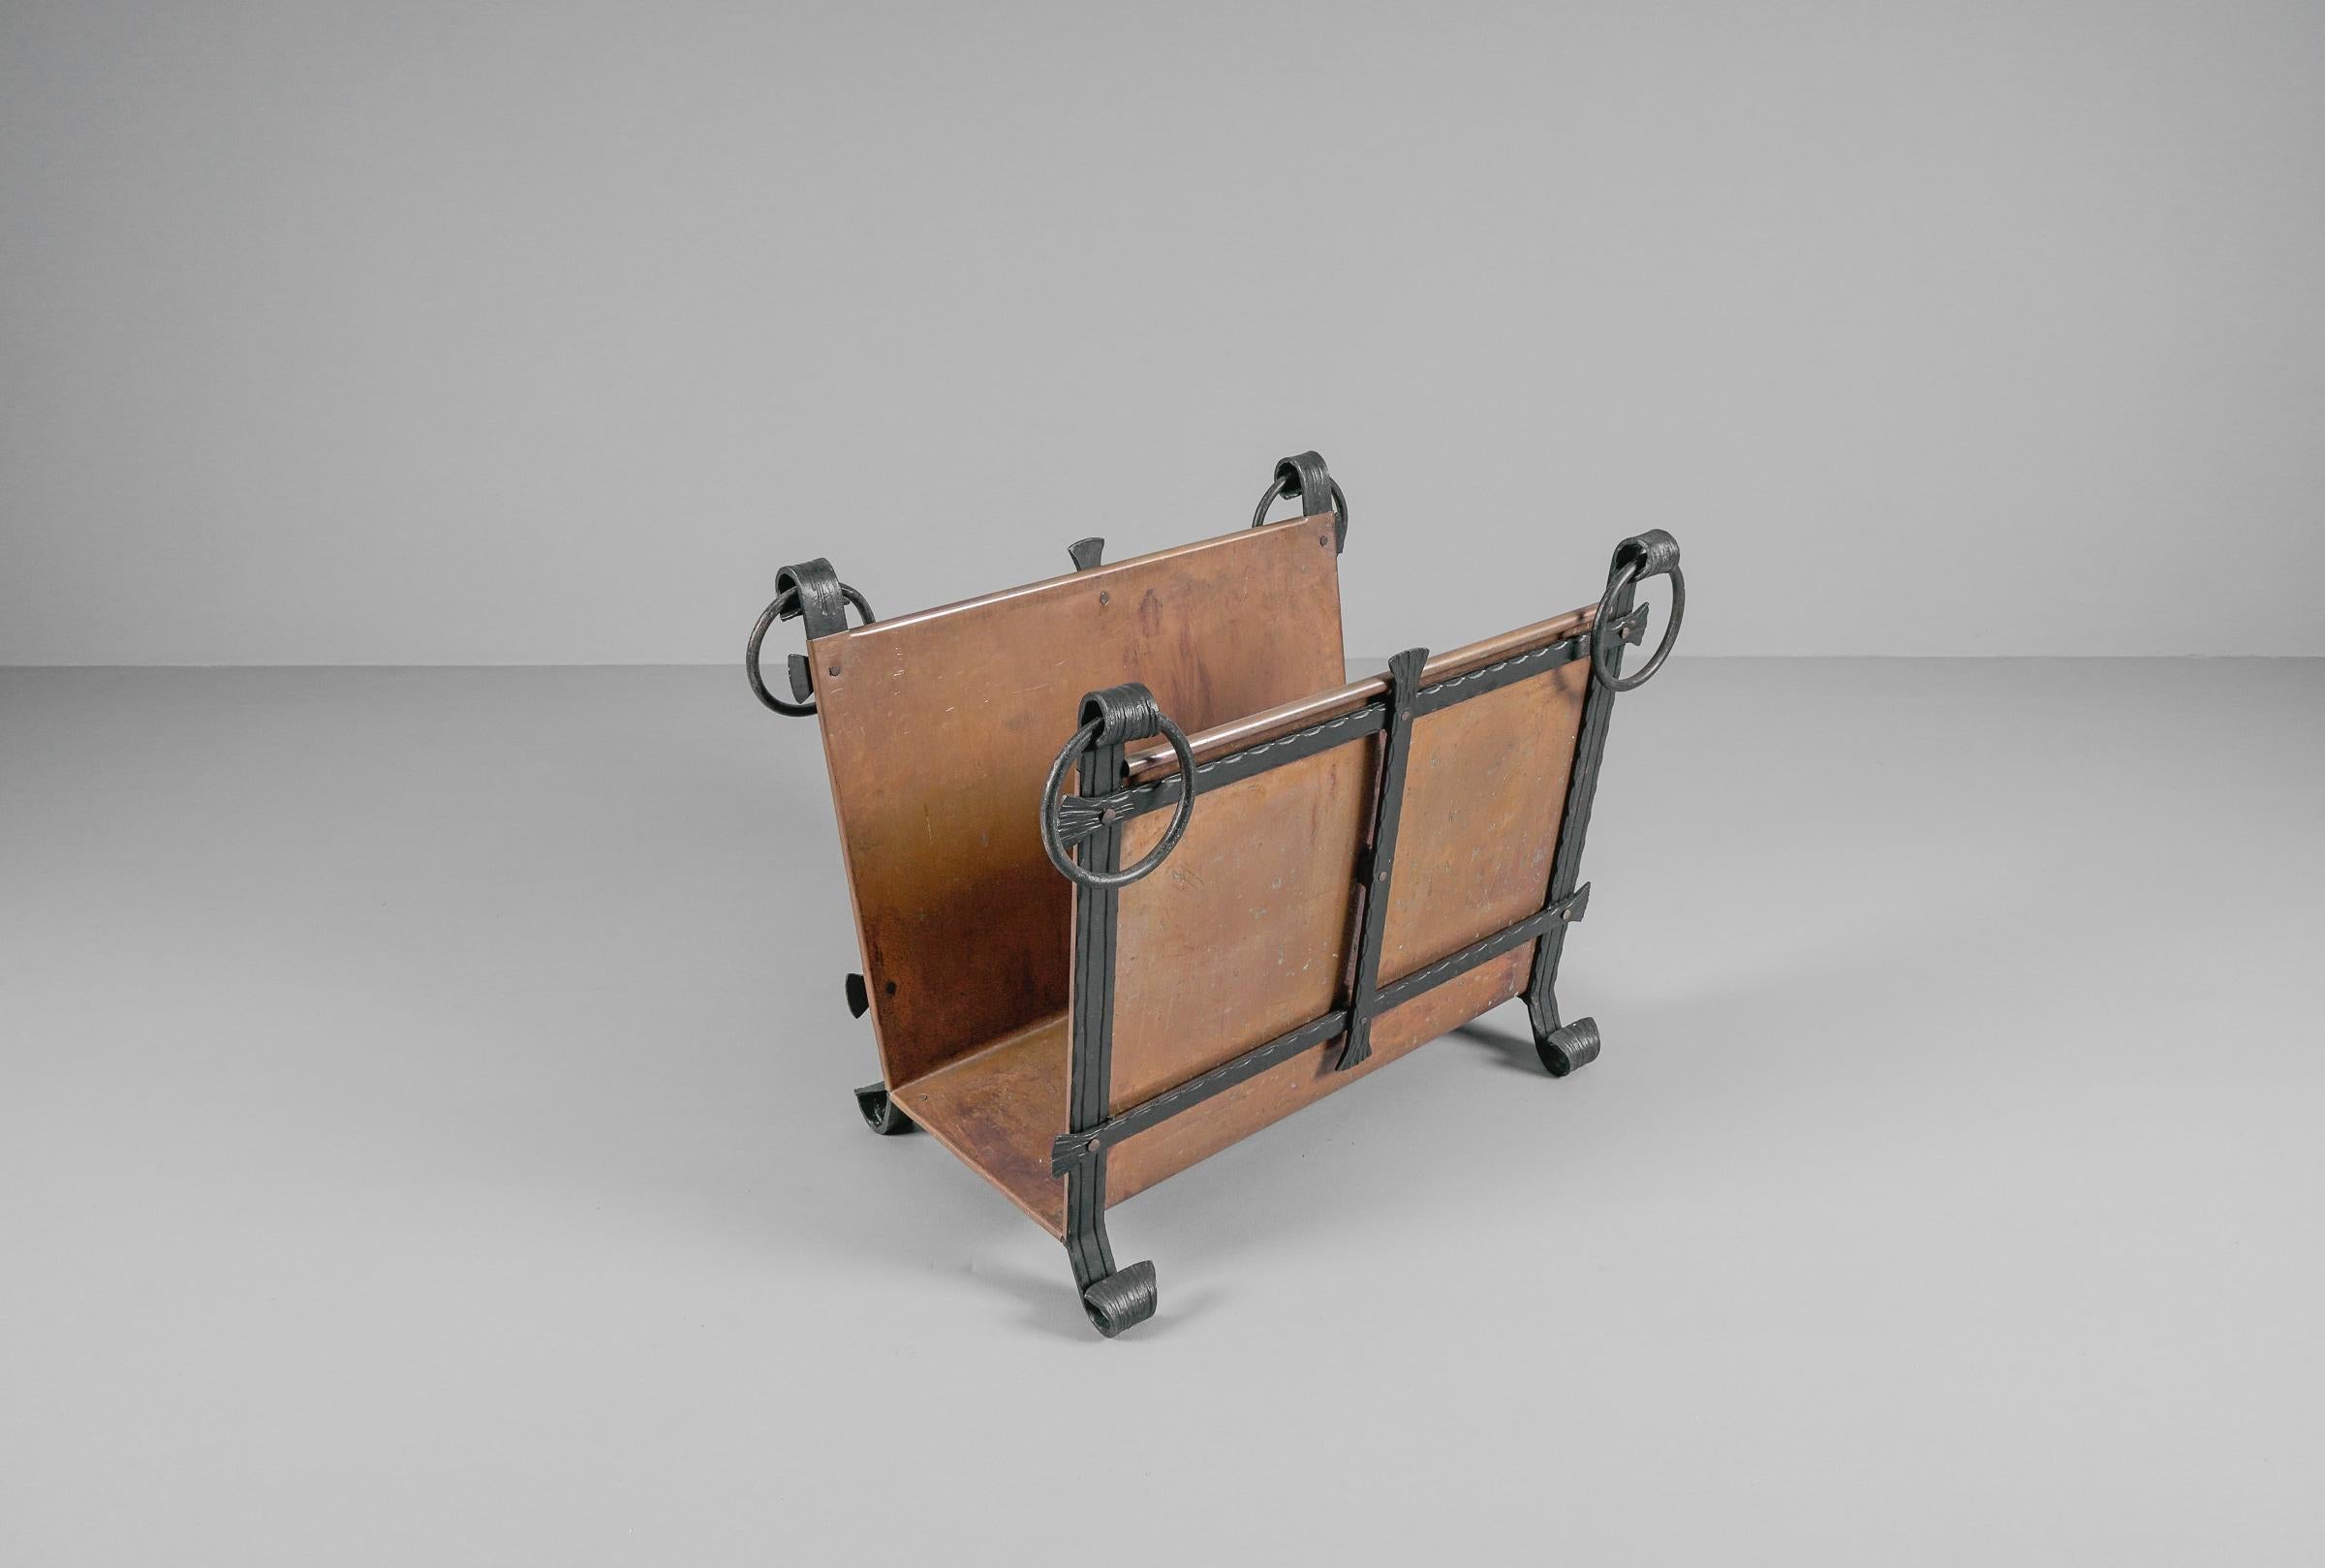 Regency Unique Handmade Wrought Iron and Copper Firewood Holder, 1970s, Italy